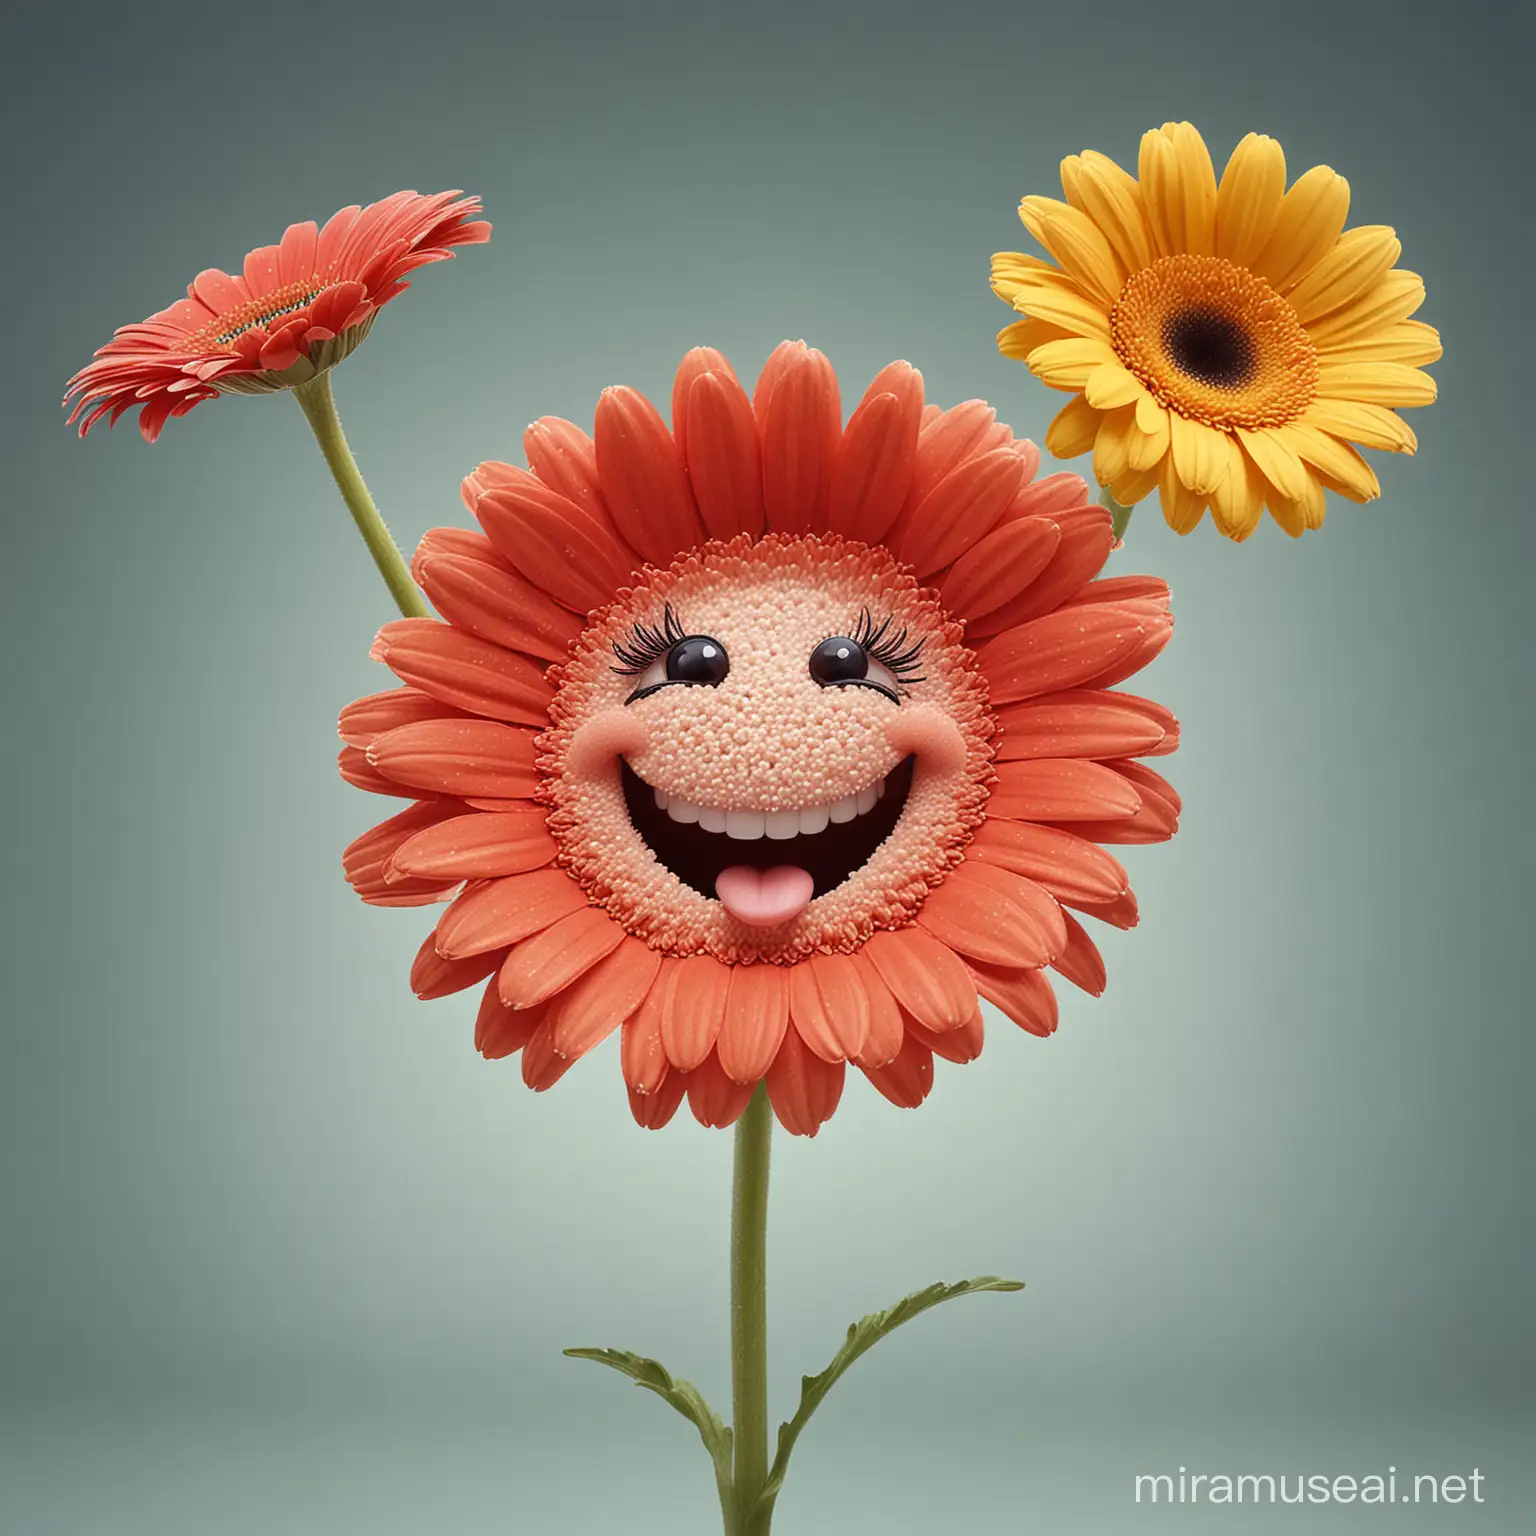 a gerbera with a smiling face and hands pointing down right, fairy tale style